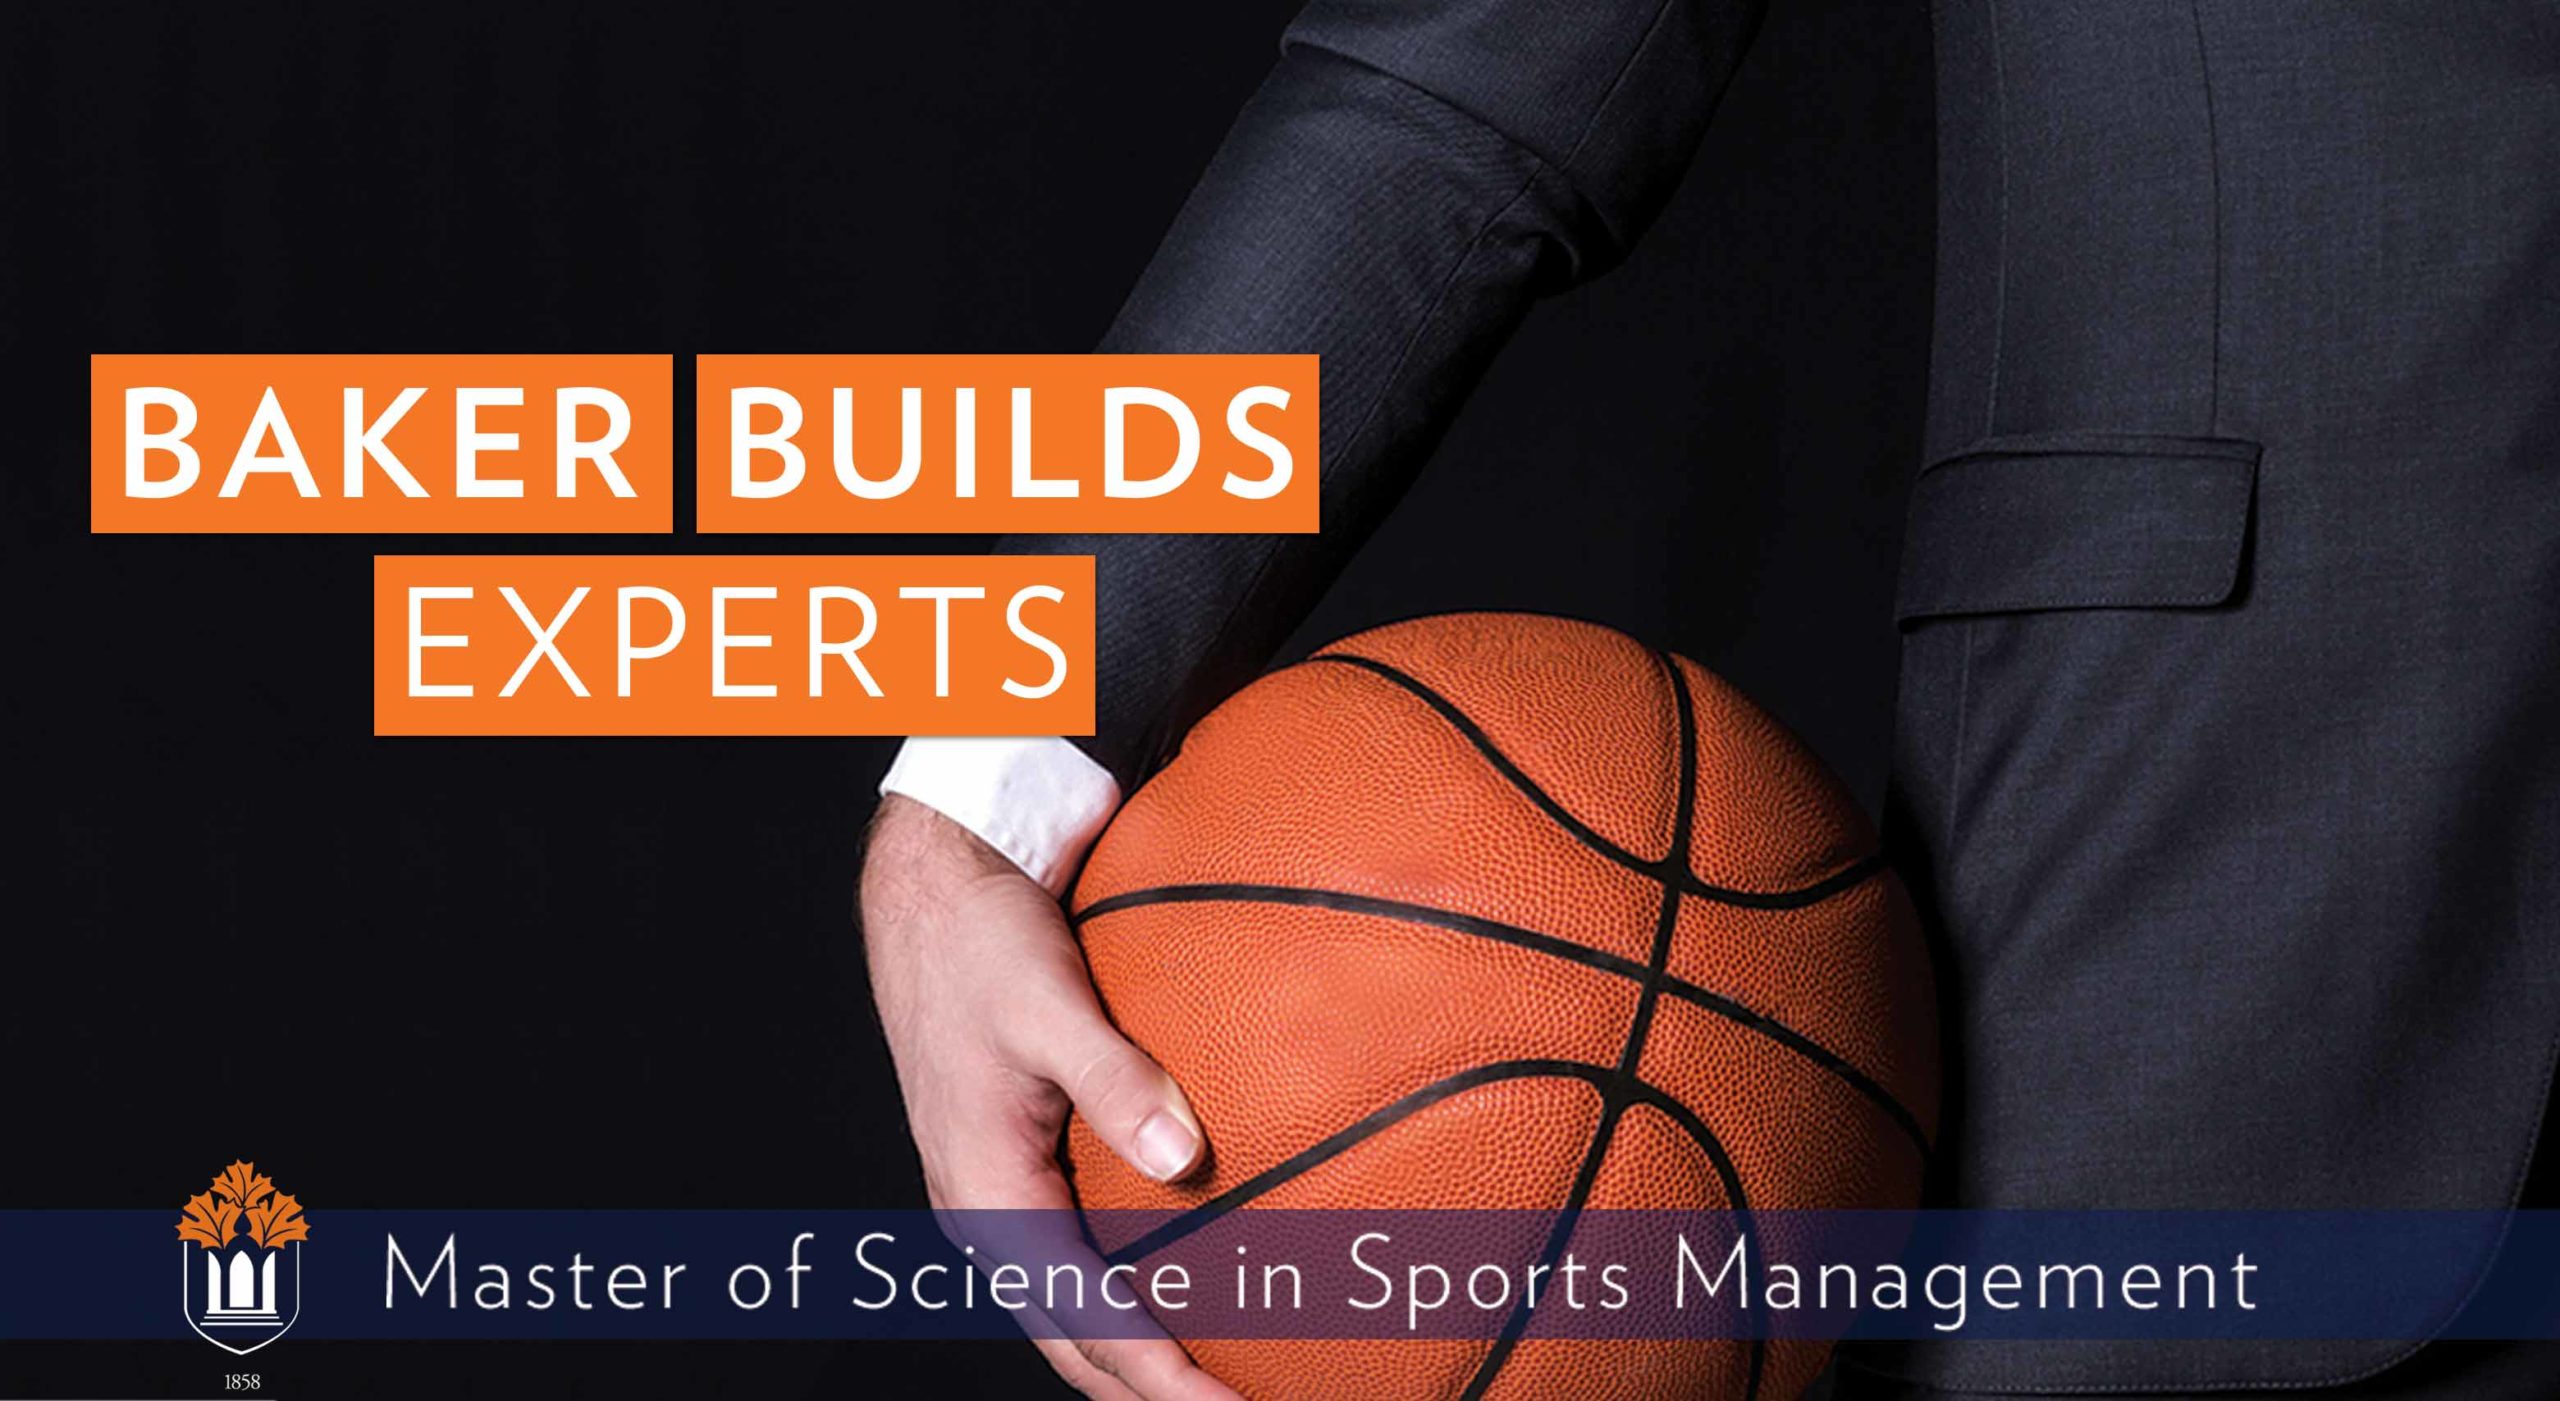 Baker Builds Experts graphic